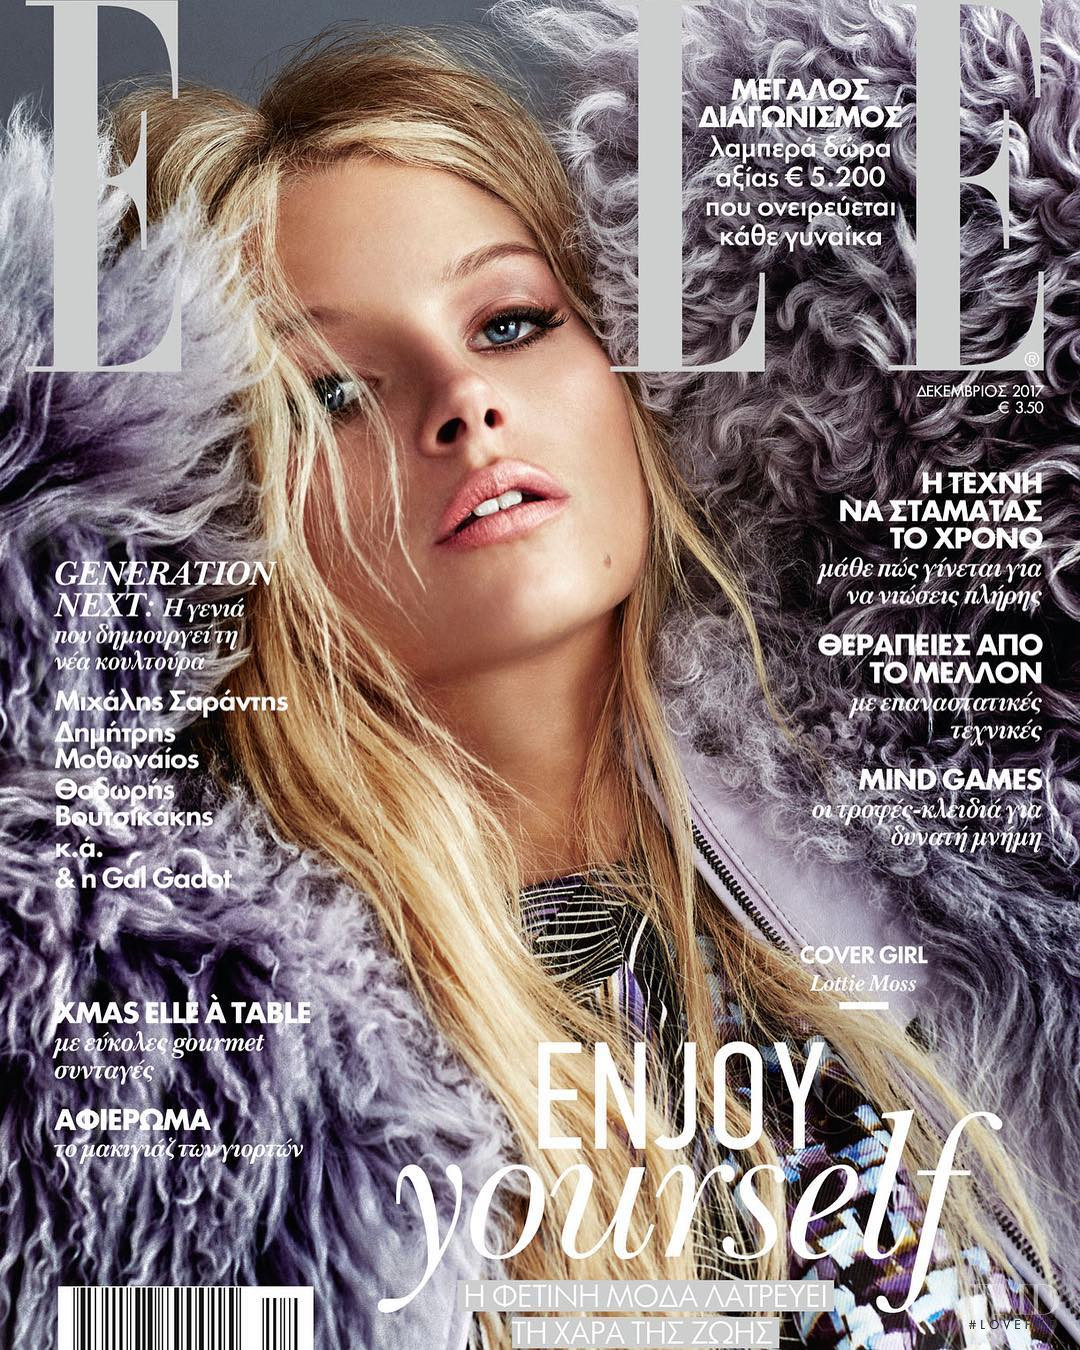 Cover of Elle Greece with Stella Maxwell, November 2017 (ID:50663 ...